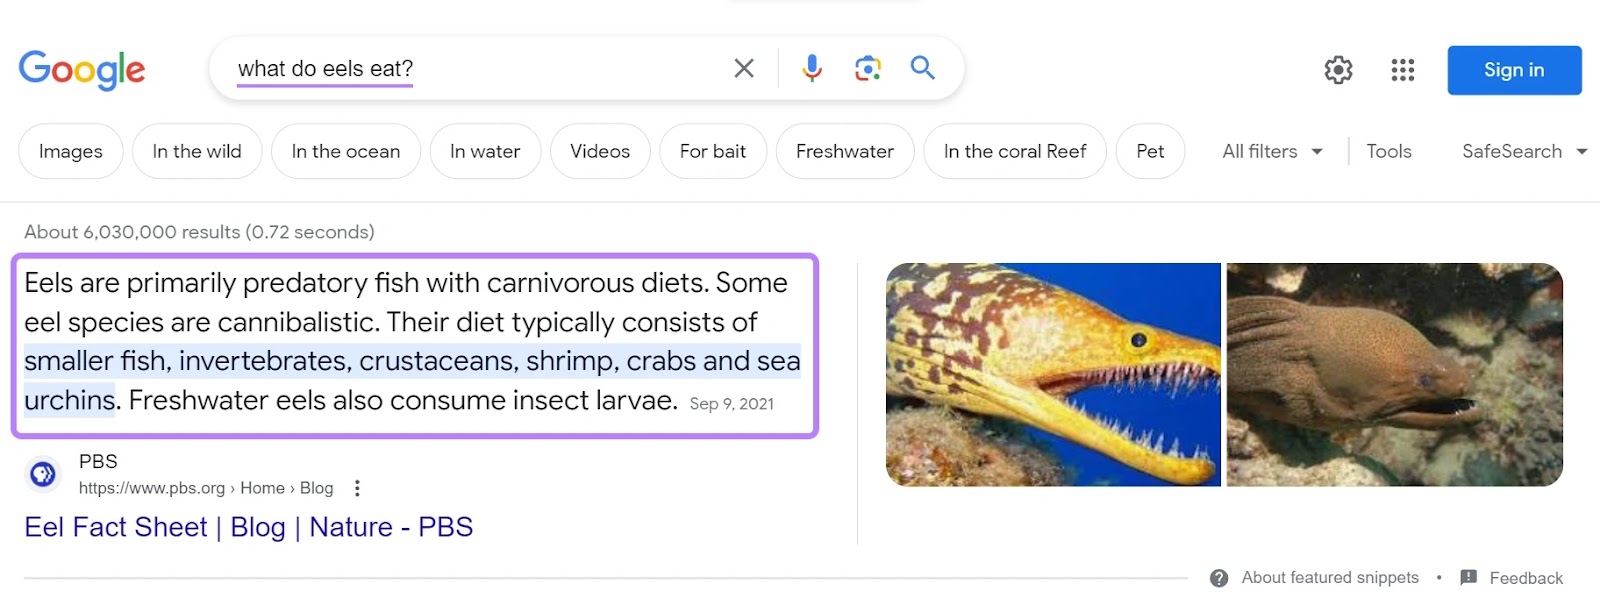 A featured snippet paragraph highlighted for "what bash  eels eat?" query